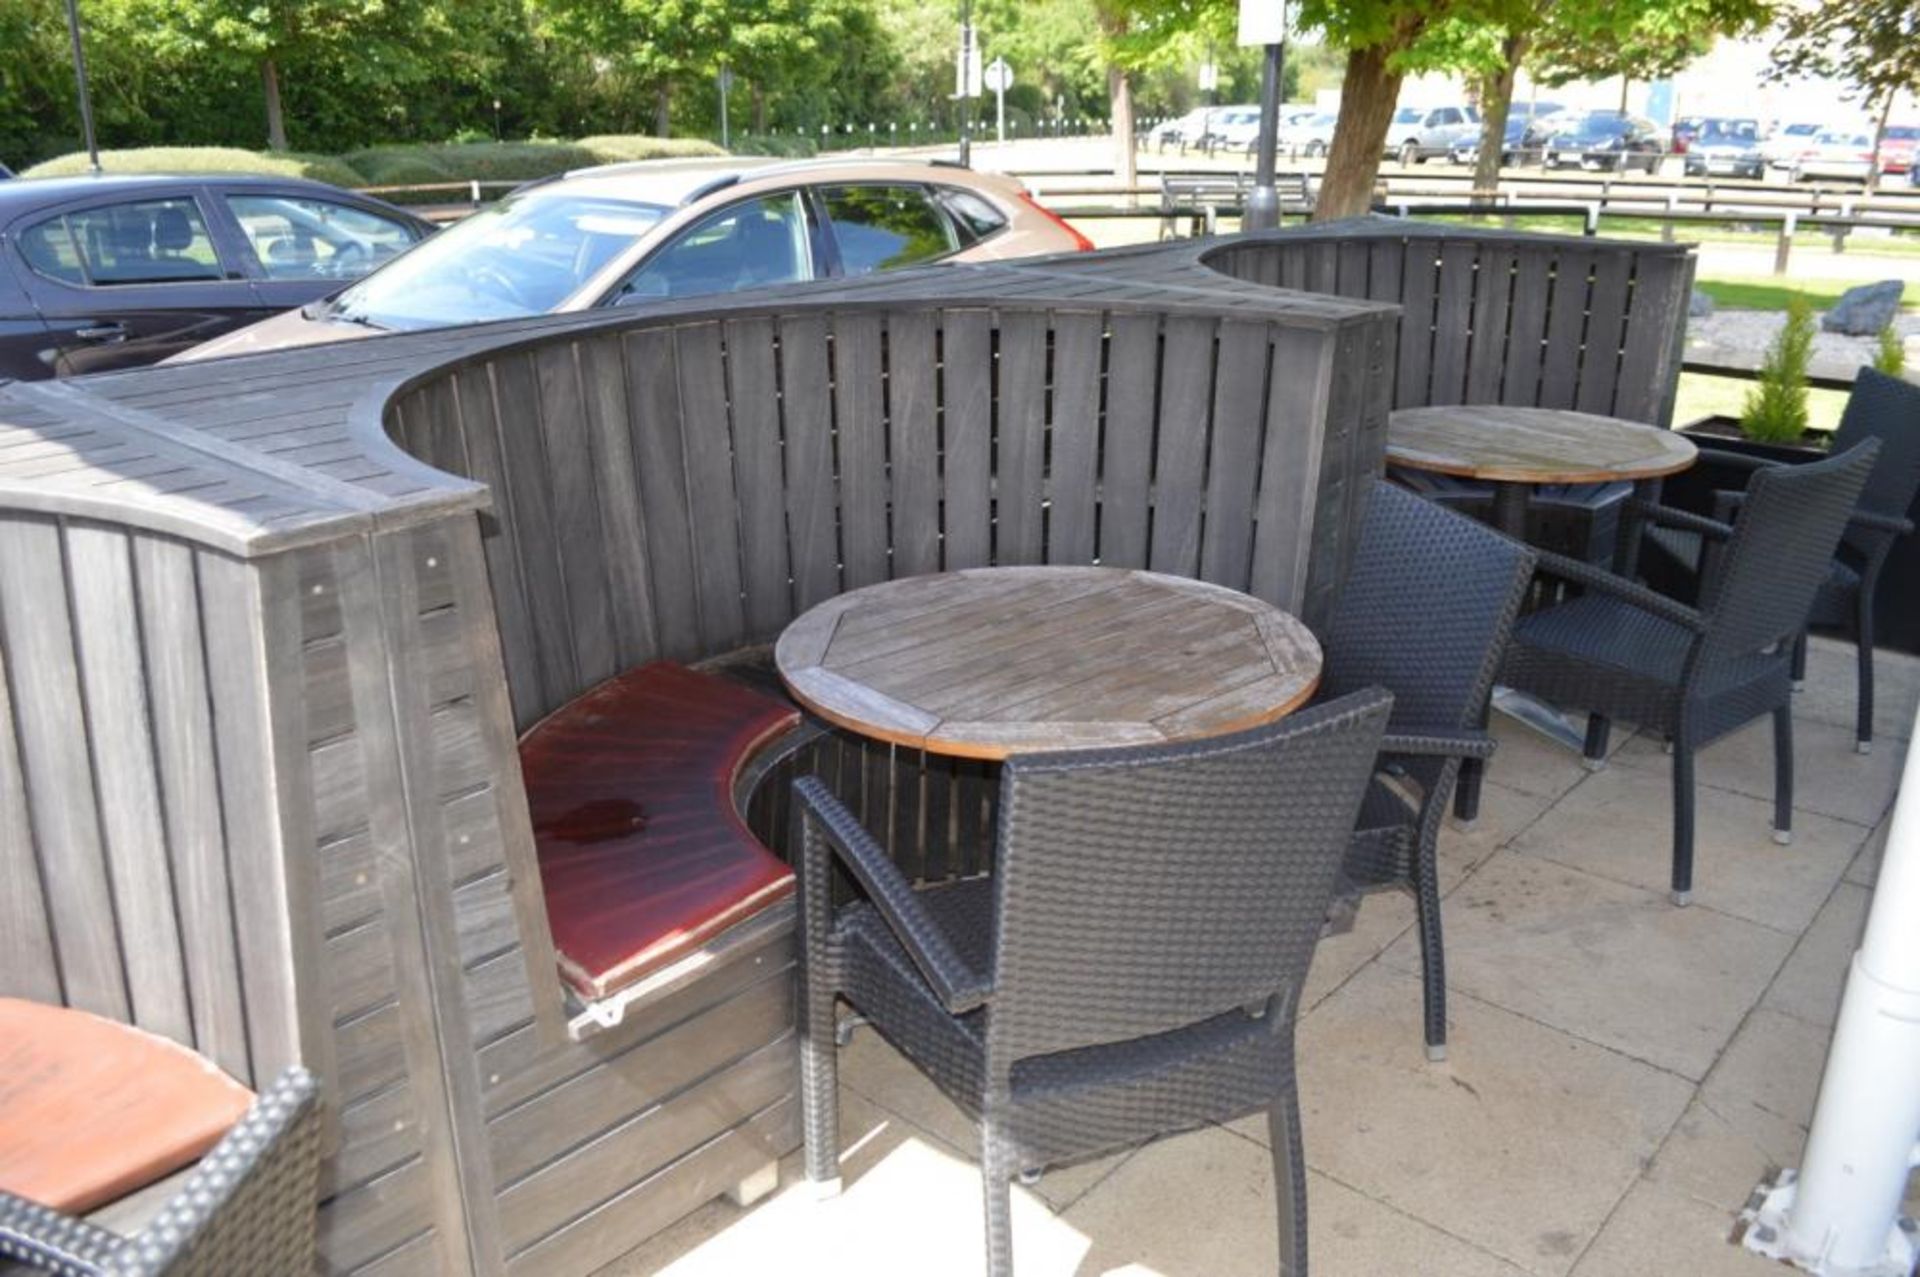 2 x Wooden Outdoor Seating Booths - Each Measure H111 x W203 x D106 cms - CL390 - Location: - Image 5 of 8